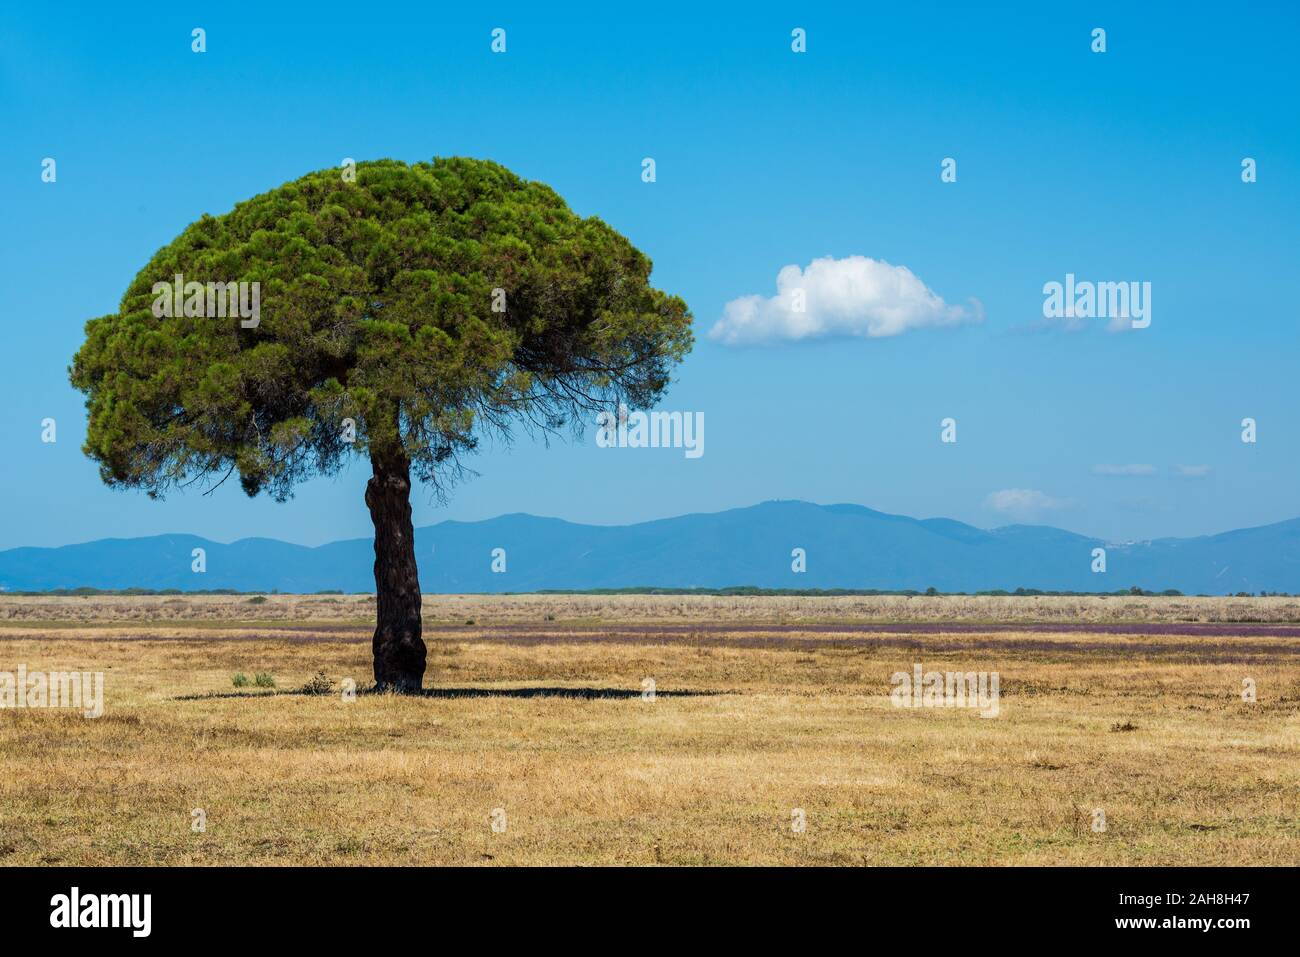 Iconic tuscanian landscape, with a solitary pine tree in the foreground, an empty dryland and distant mountains, under a blue summer sky Stock Photo